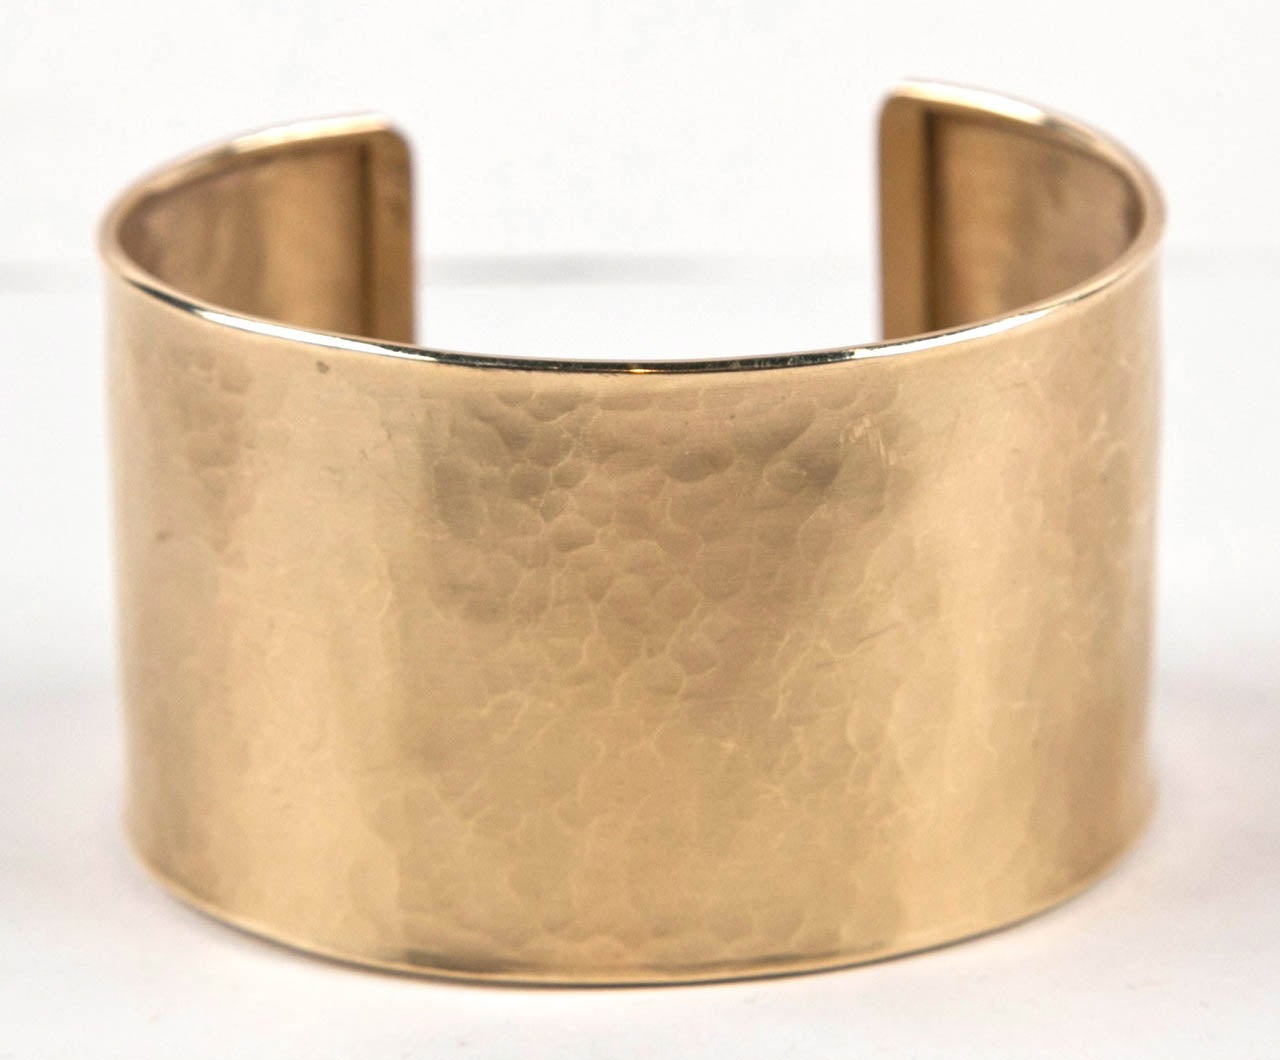 Contemporary Handmade Pounded Gold Cuff Bracelet Presented by Jewelry and Such